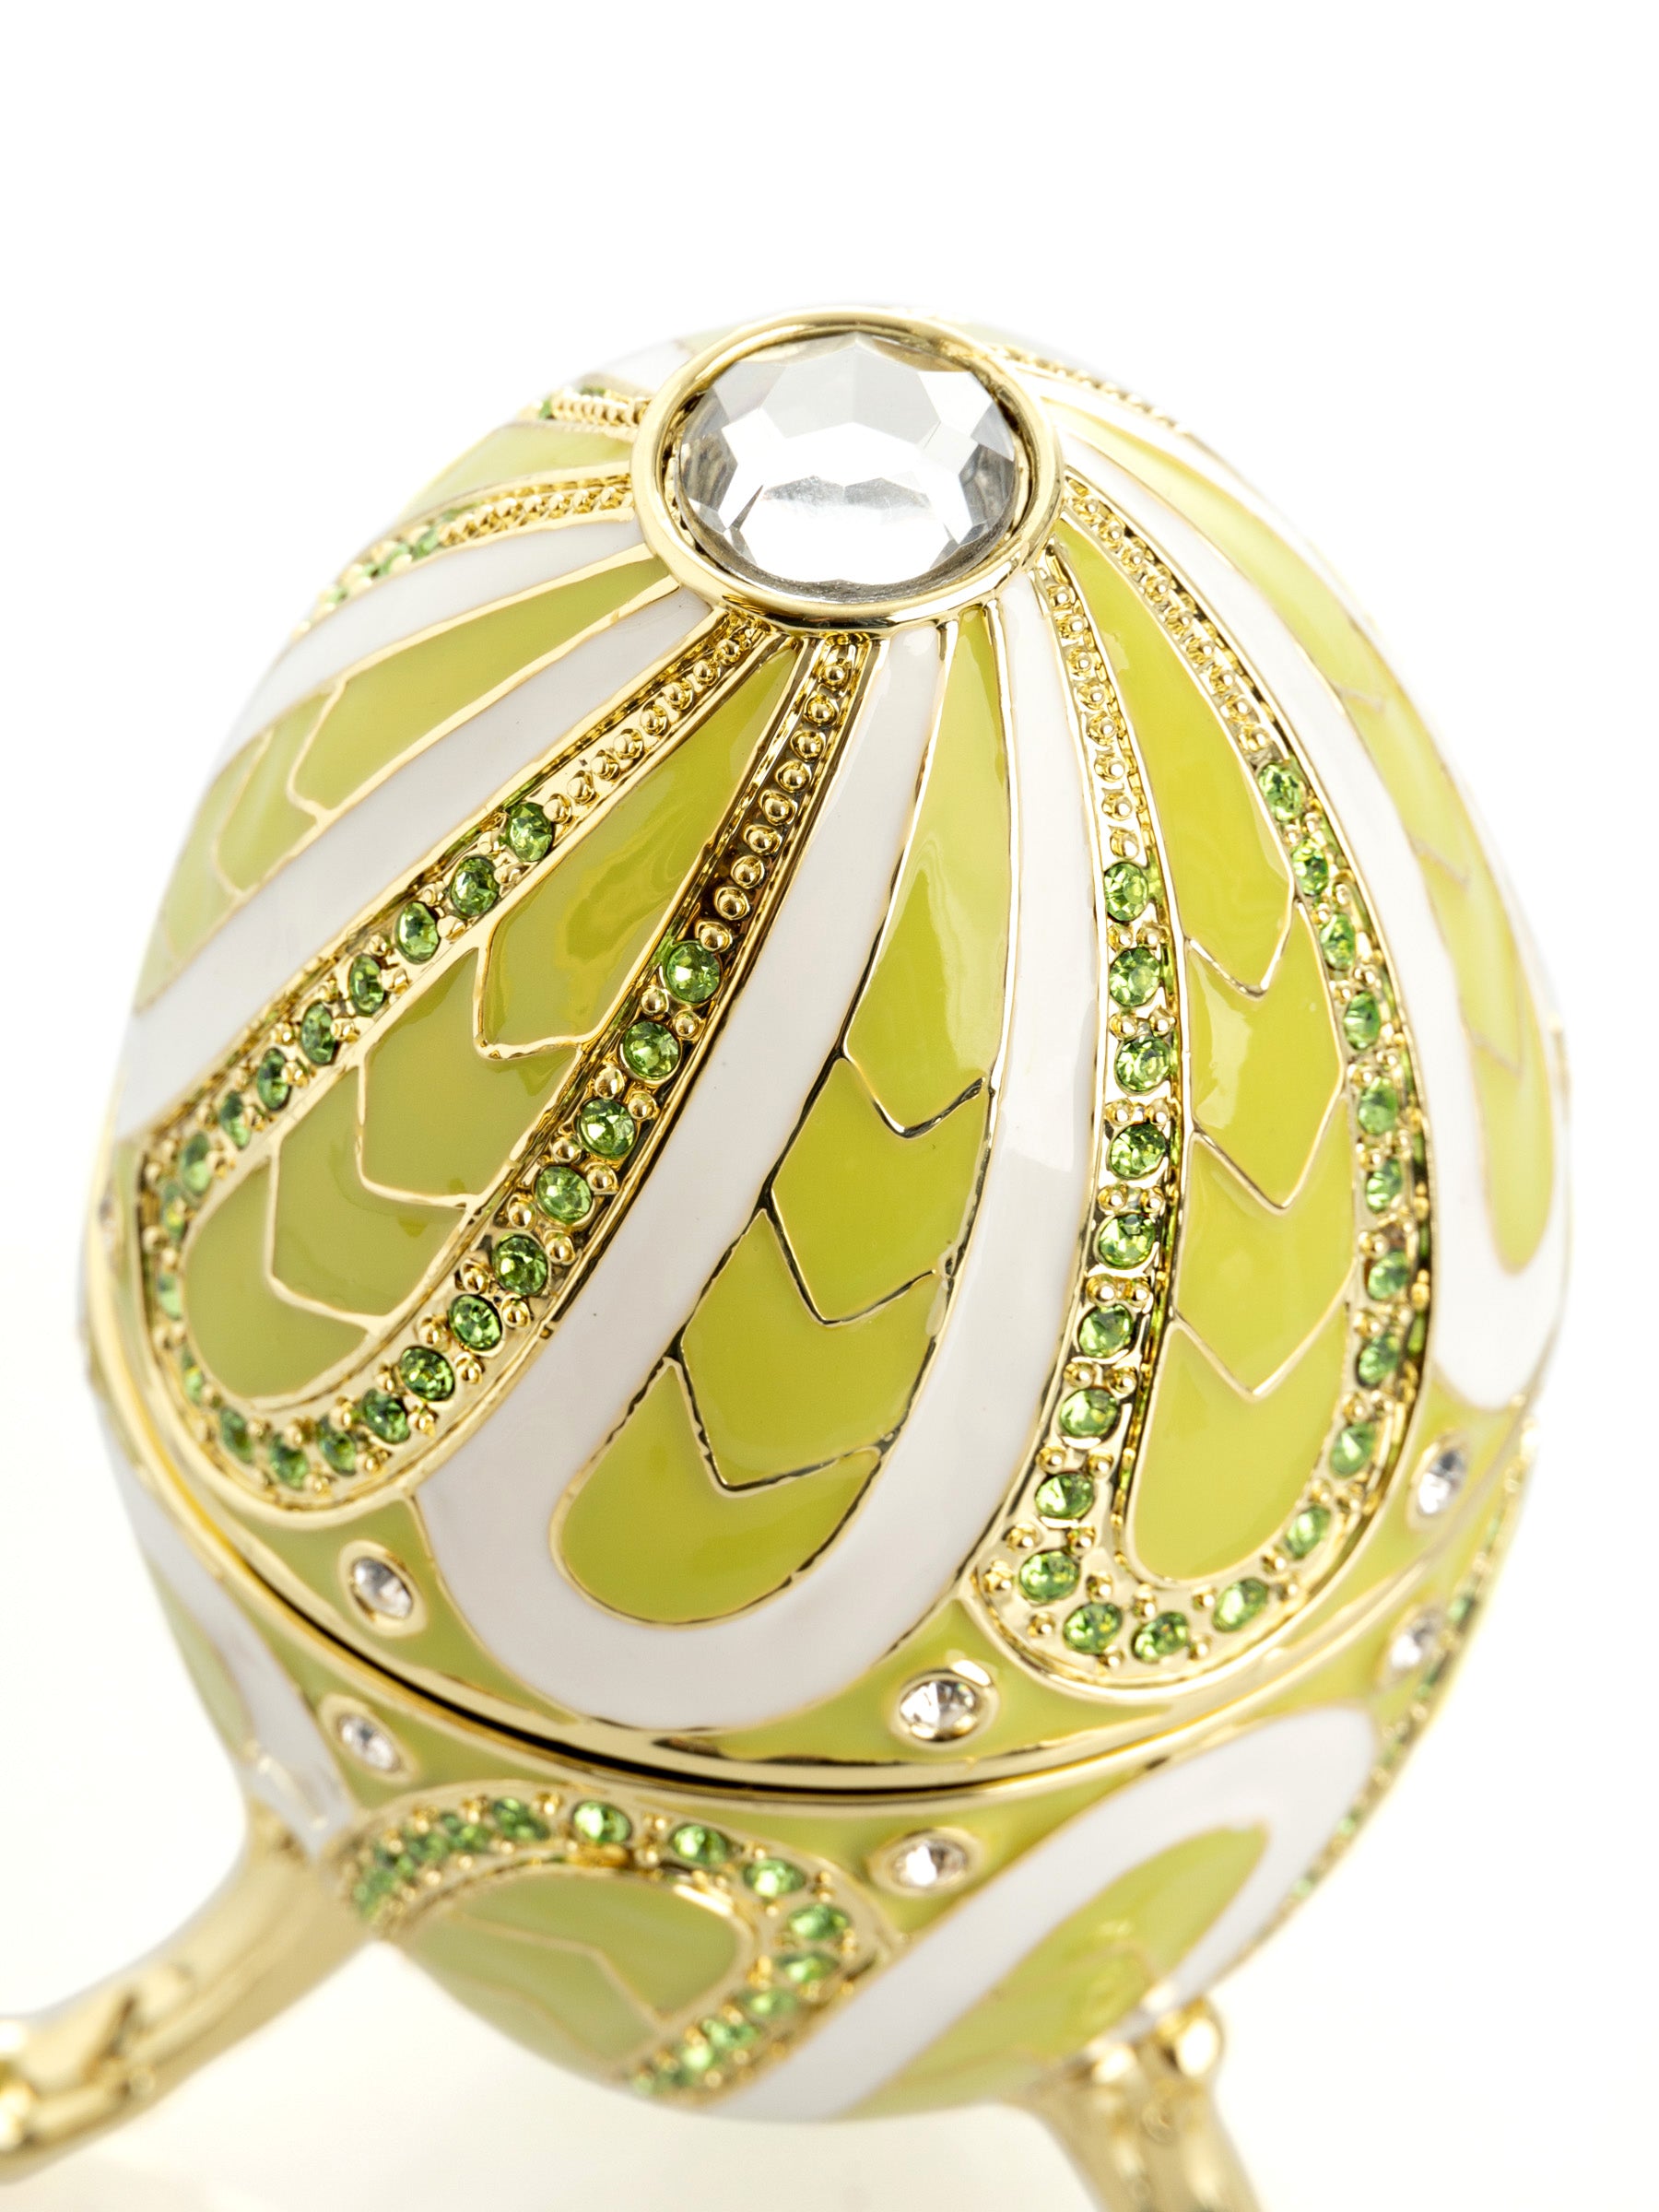 Green Music box Fur Elise by Beethoven Faberge Egg